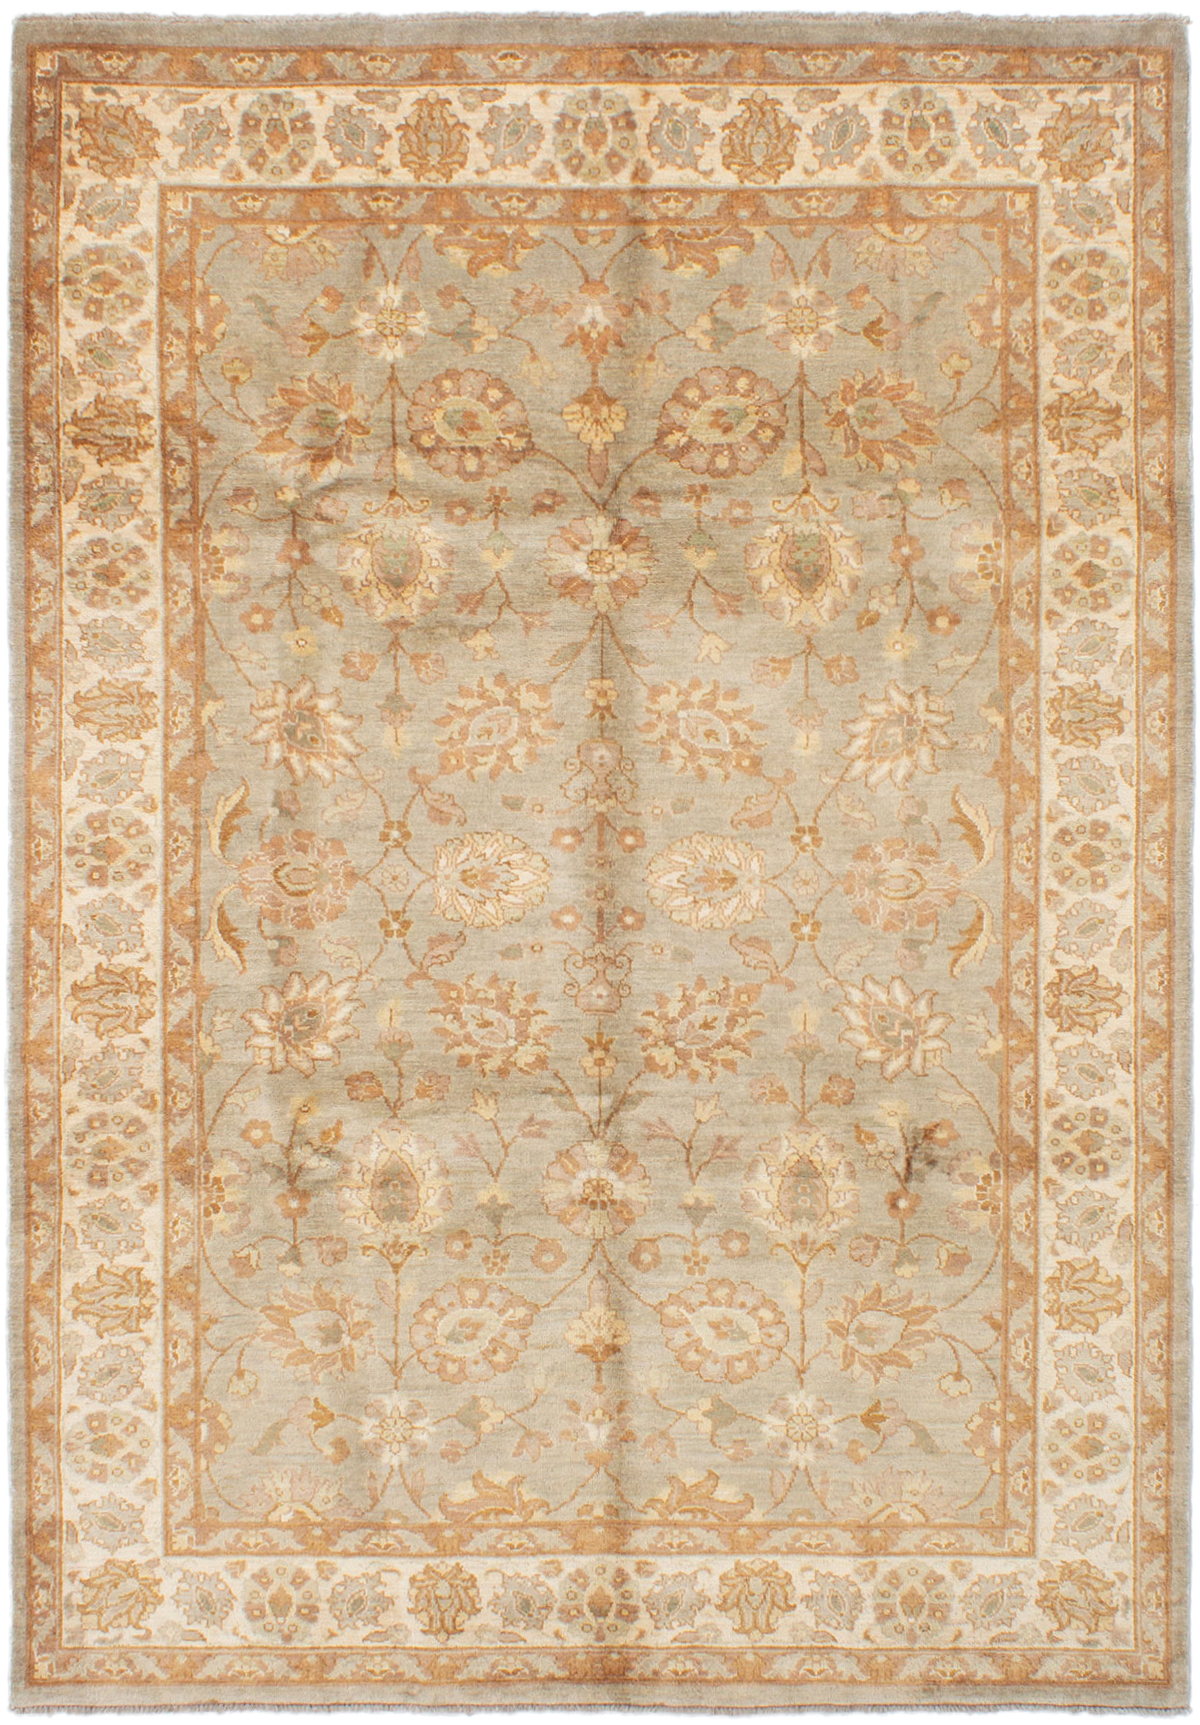 Hand-knotted Peshawar Finest Light Grey Wool Rug 7'1" x 10'1" Size: 7'1" x 10'1"  